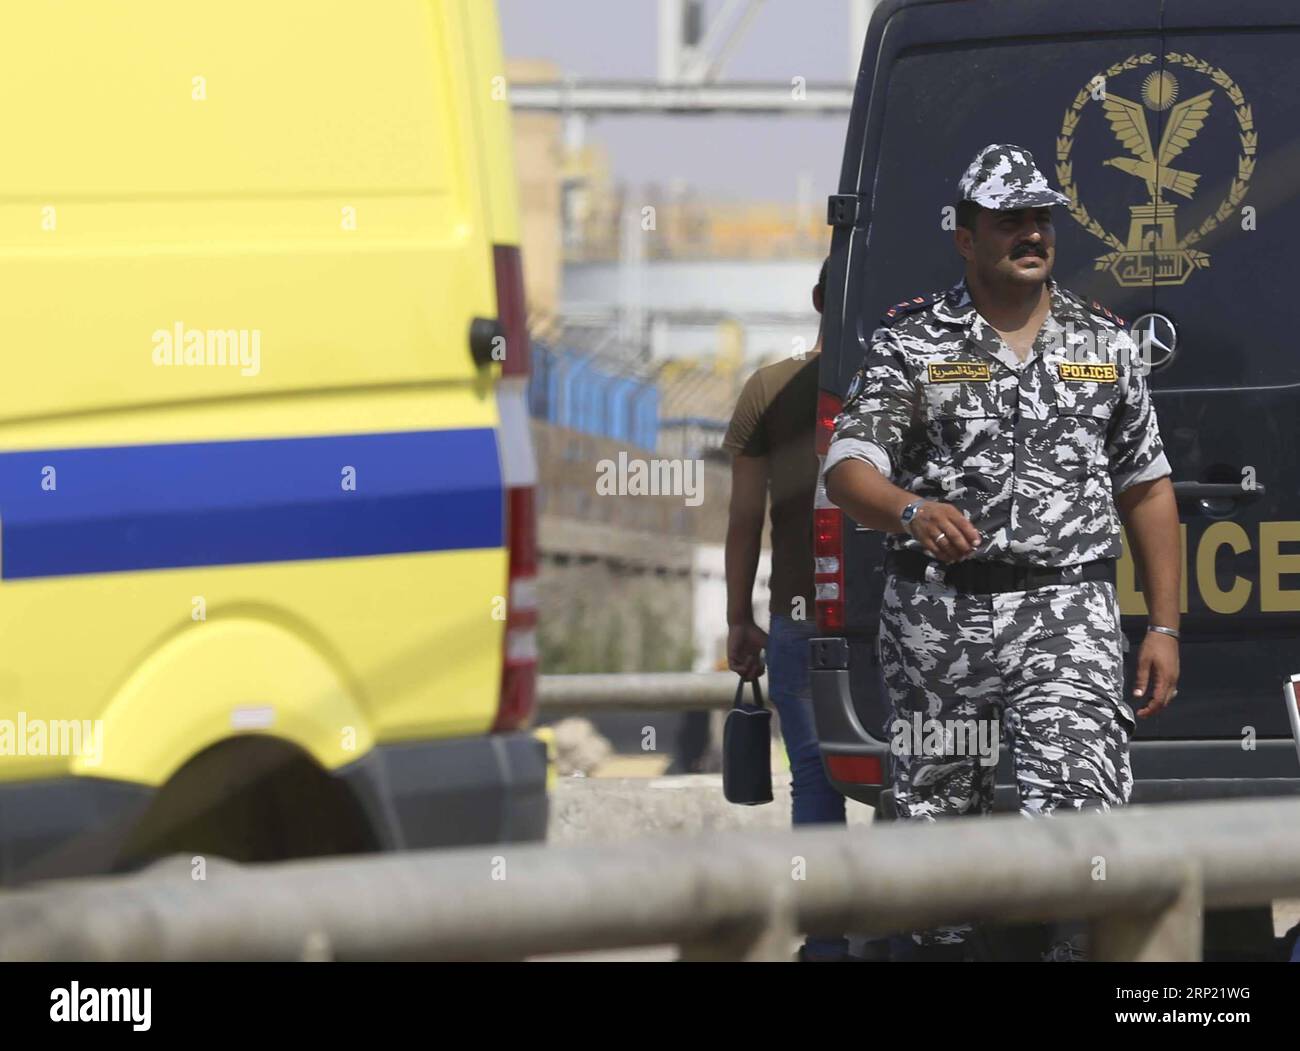 (180811) -- CAIRO, Aug. 11, 2018 () -- A police officer stands guard at the site where a suicide bomber detonated his explosive belt in Cairo, Egypt, Aug. 11, 2018. Egyptian forces have thwarted on Saturday an attempted attack on a church in Cairo before the suicide bomber infiltrating into the crowd, state-run Ahram news website reported. () EGYPT-CAIRO-ATTEMPTED SUICIDE ATTACK Xinhua PUBLICATIONxNOTxINxCHN Stock Photo